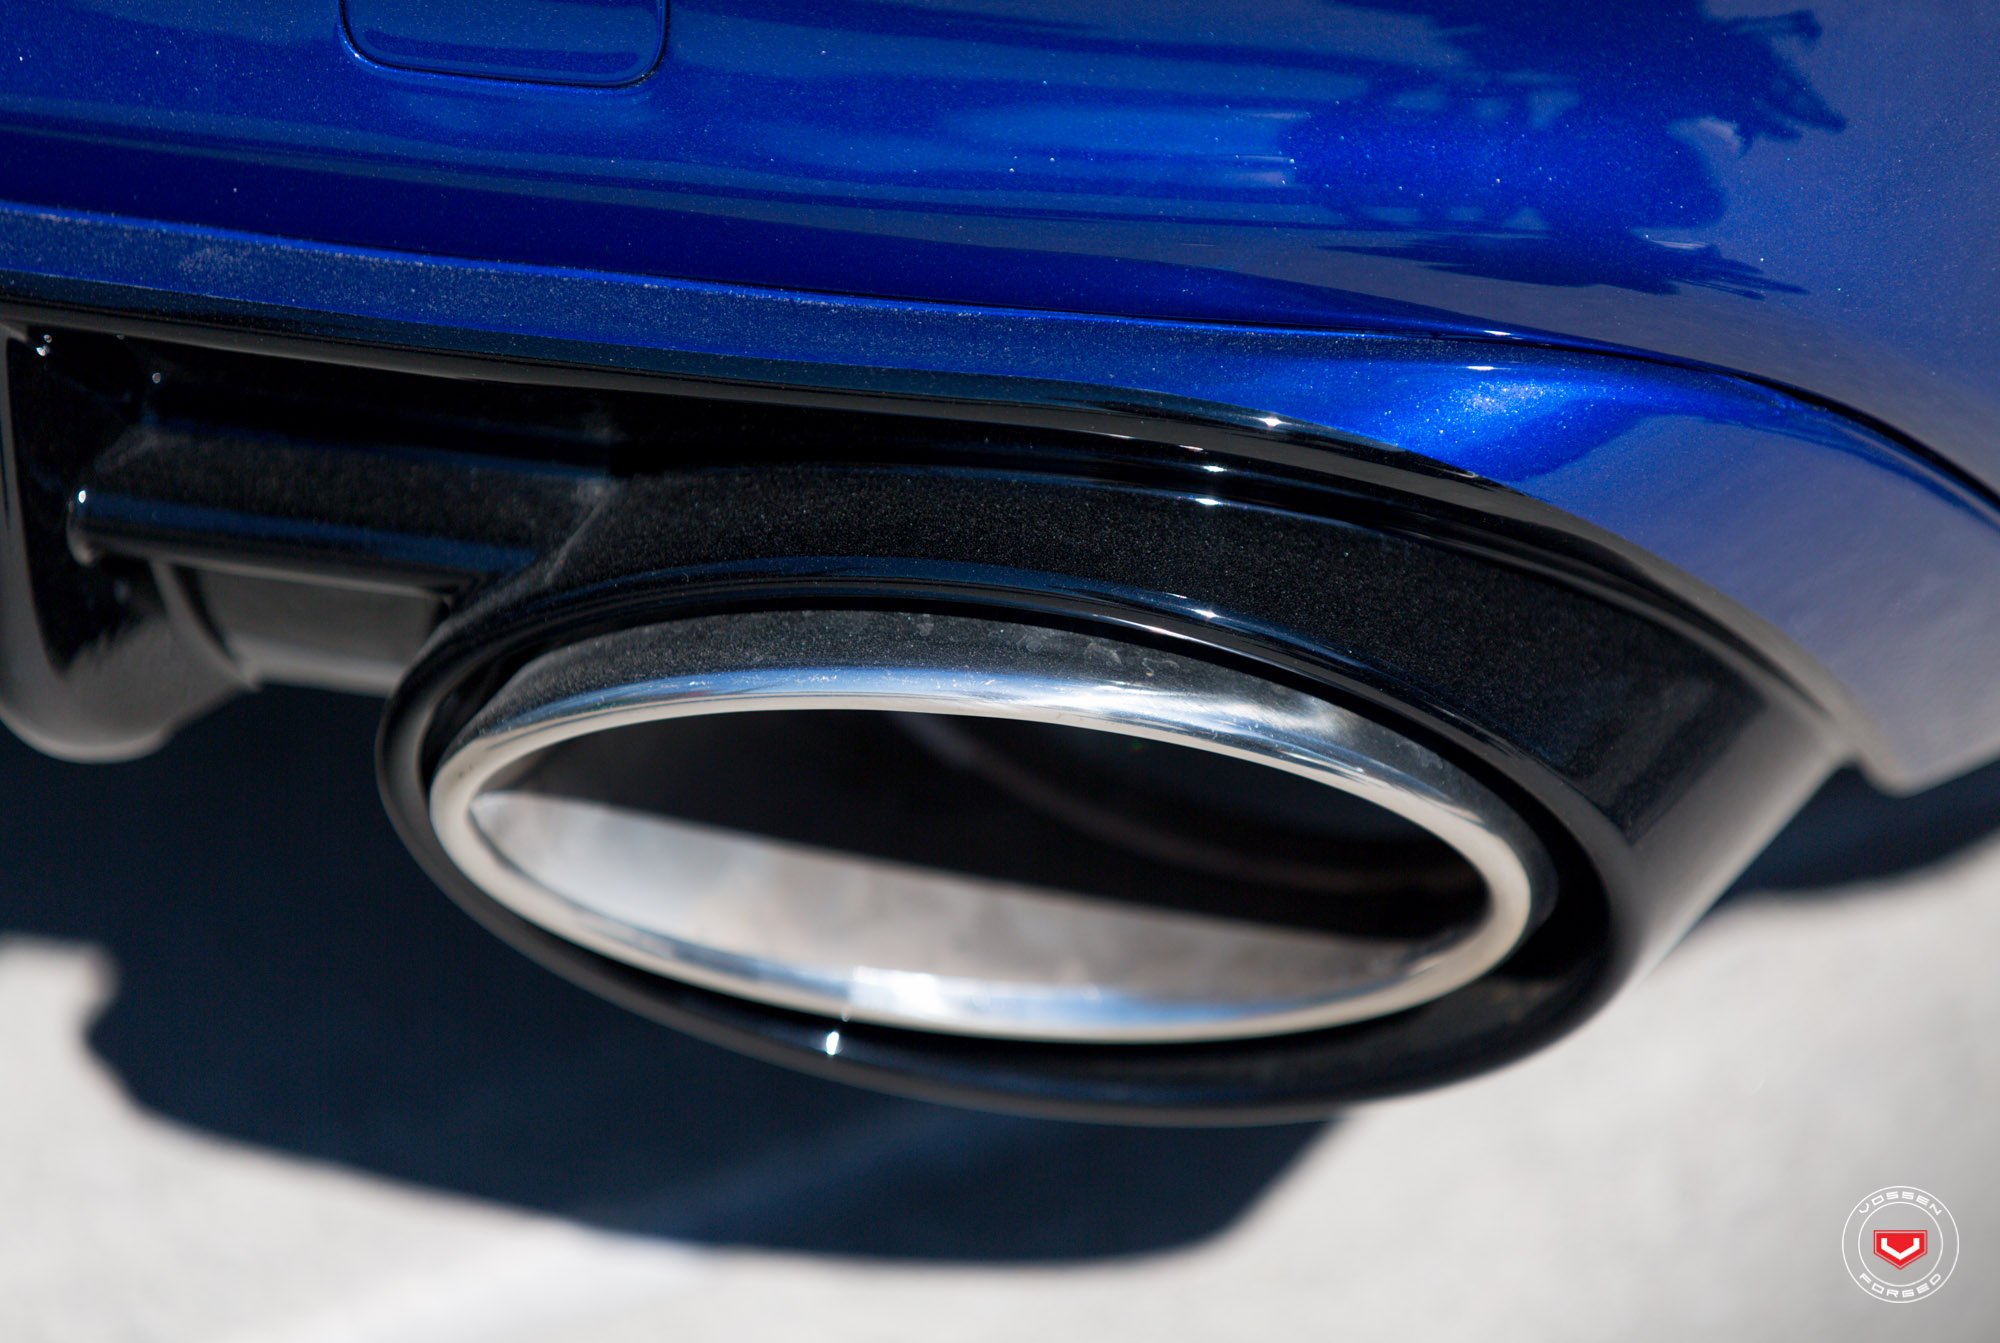 Custom Rear Diffuser with Single Exhaust Tips on Blue Audi A6 - Photo by Vossen